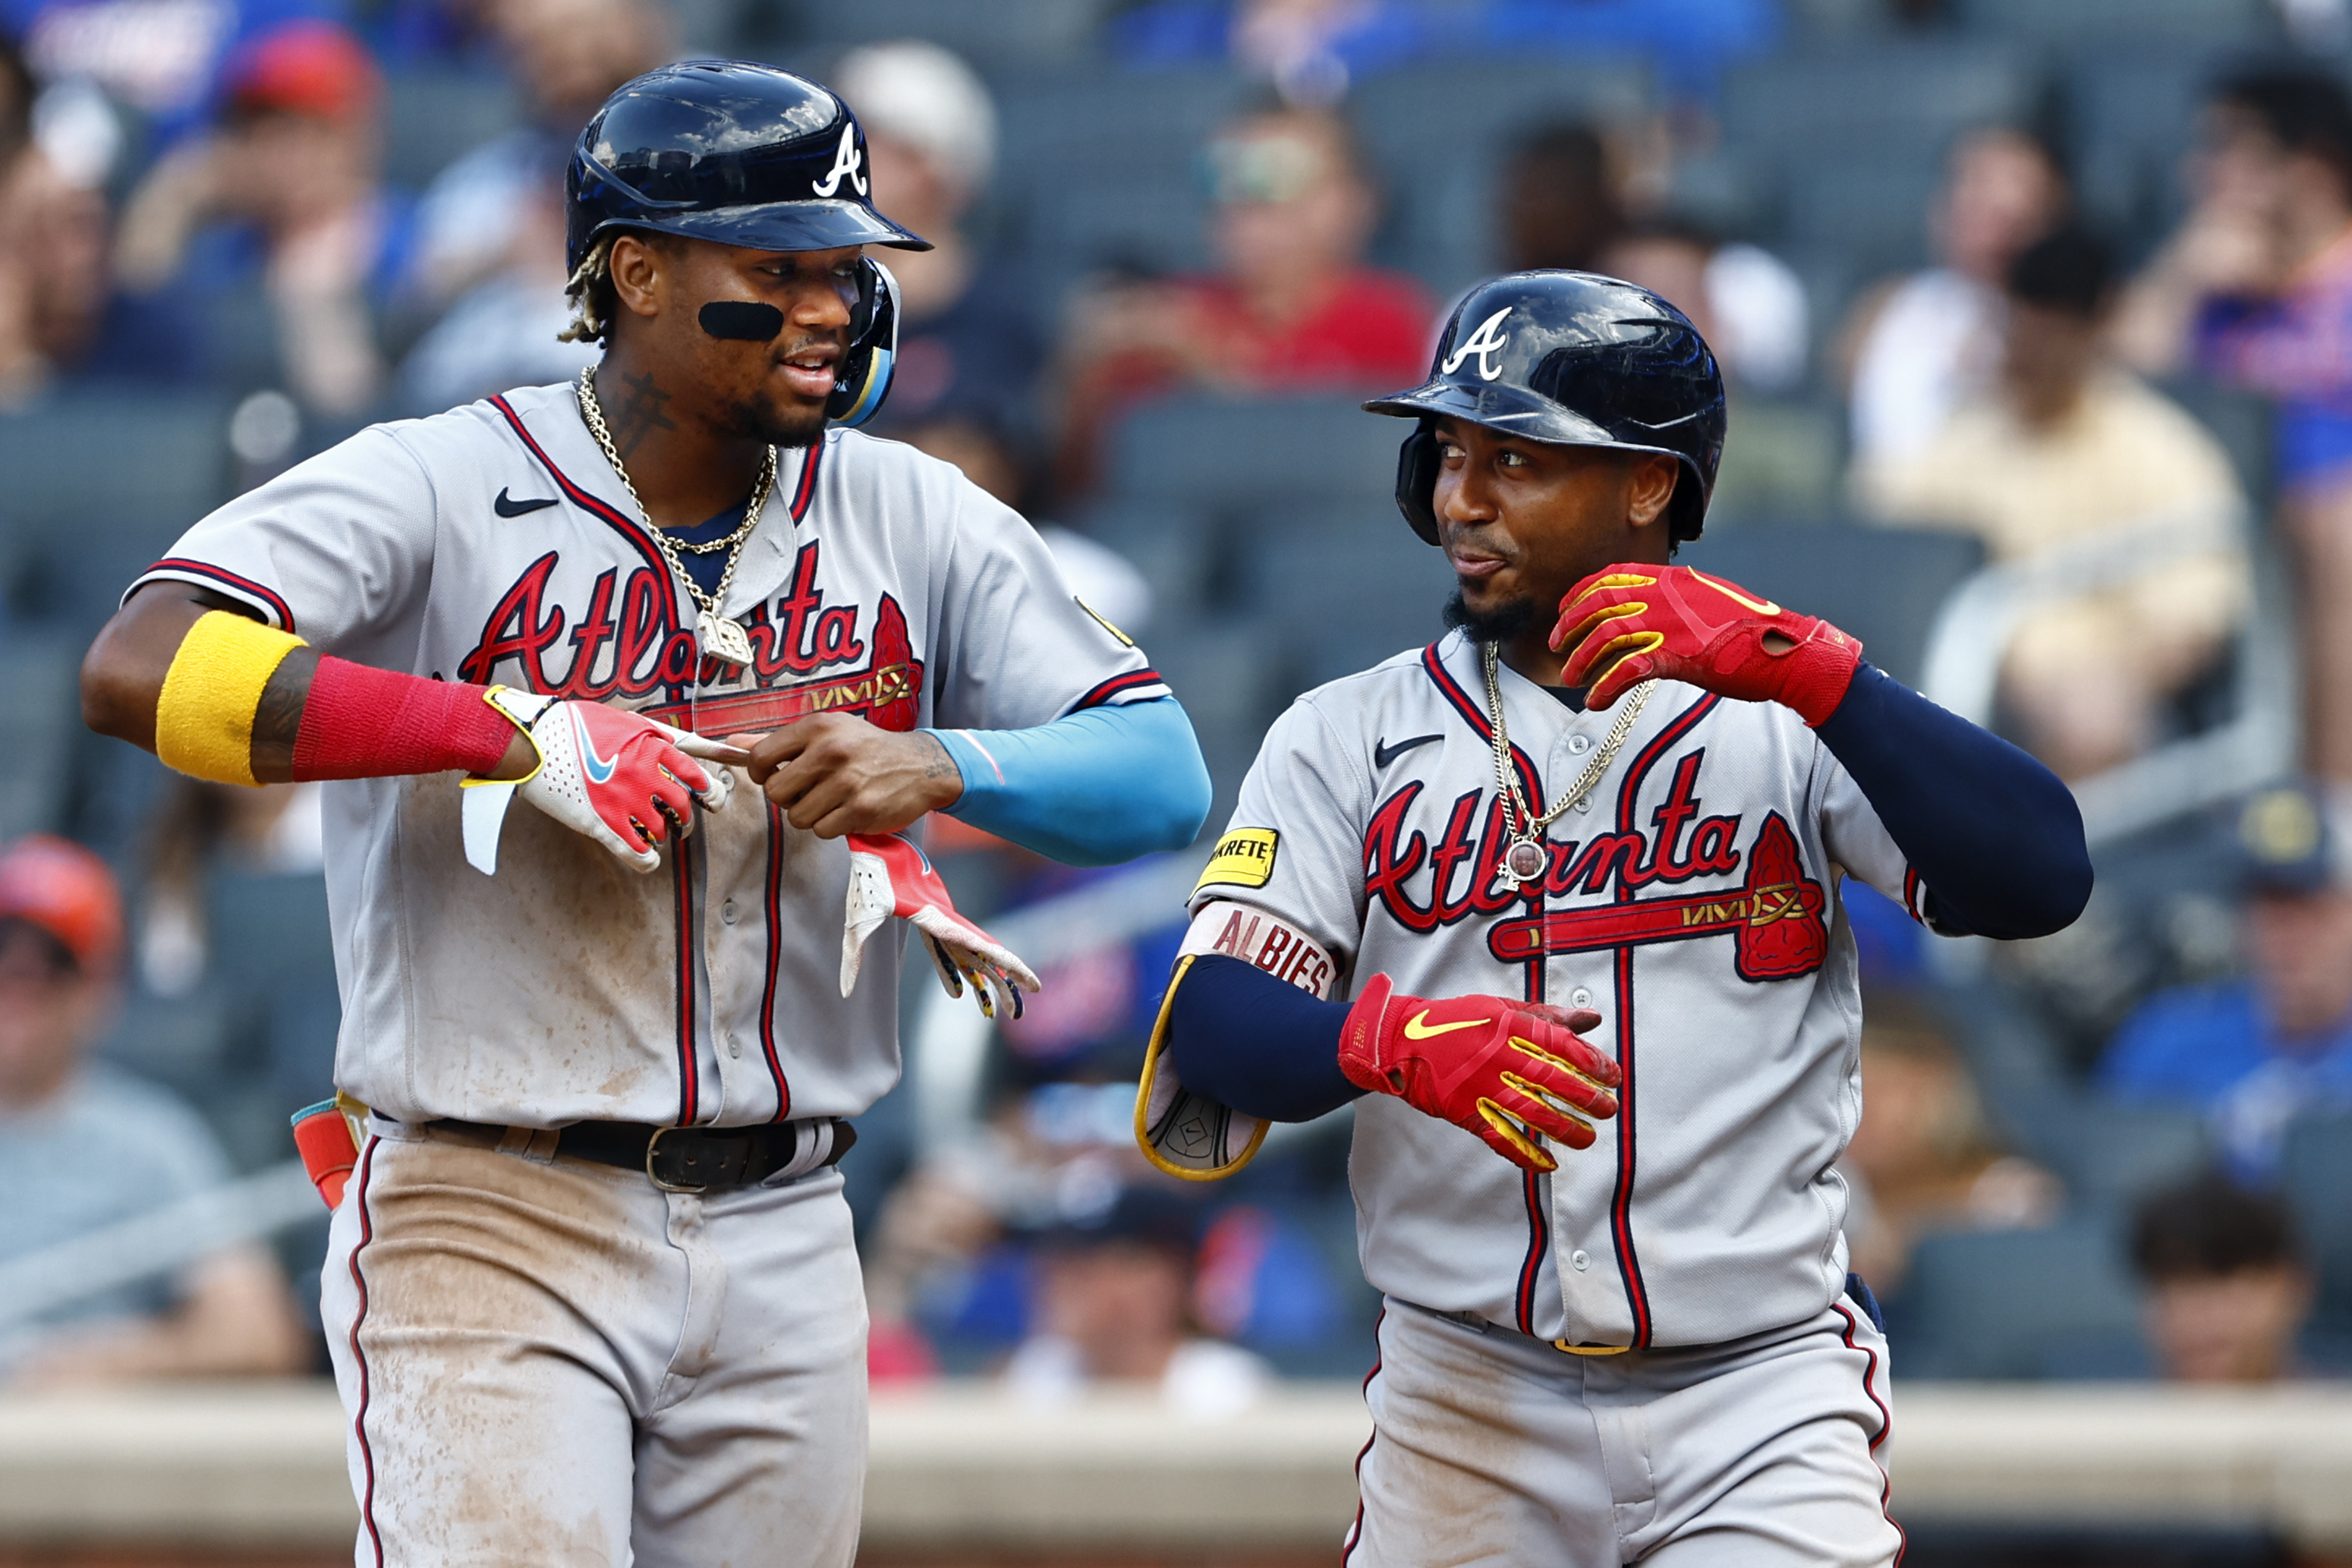 Are the Braves the greatest offense in baseball history? They're